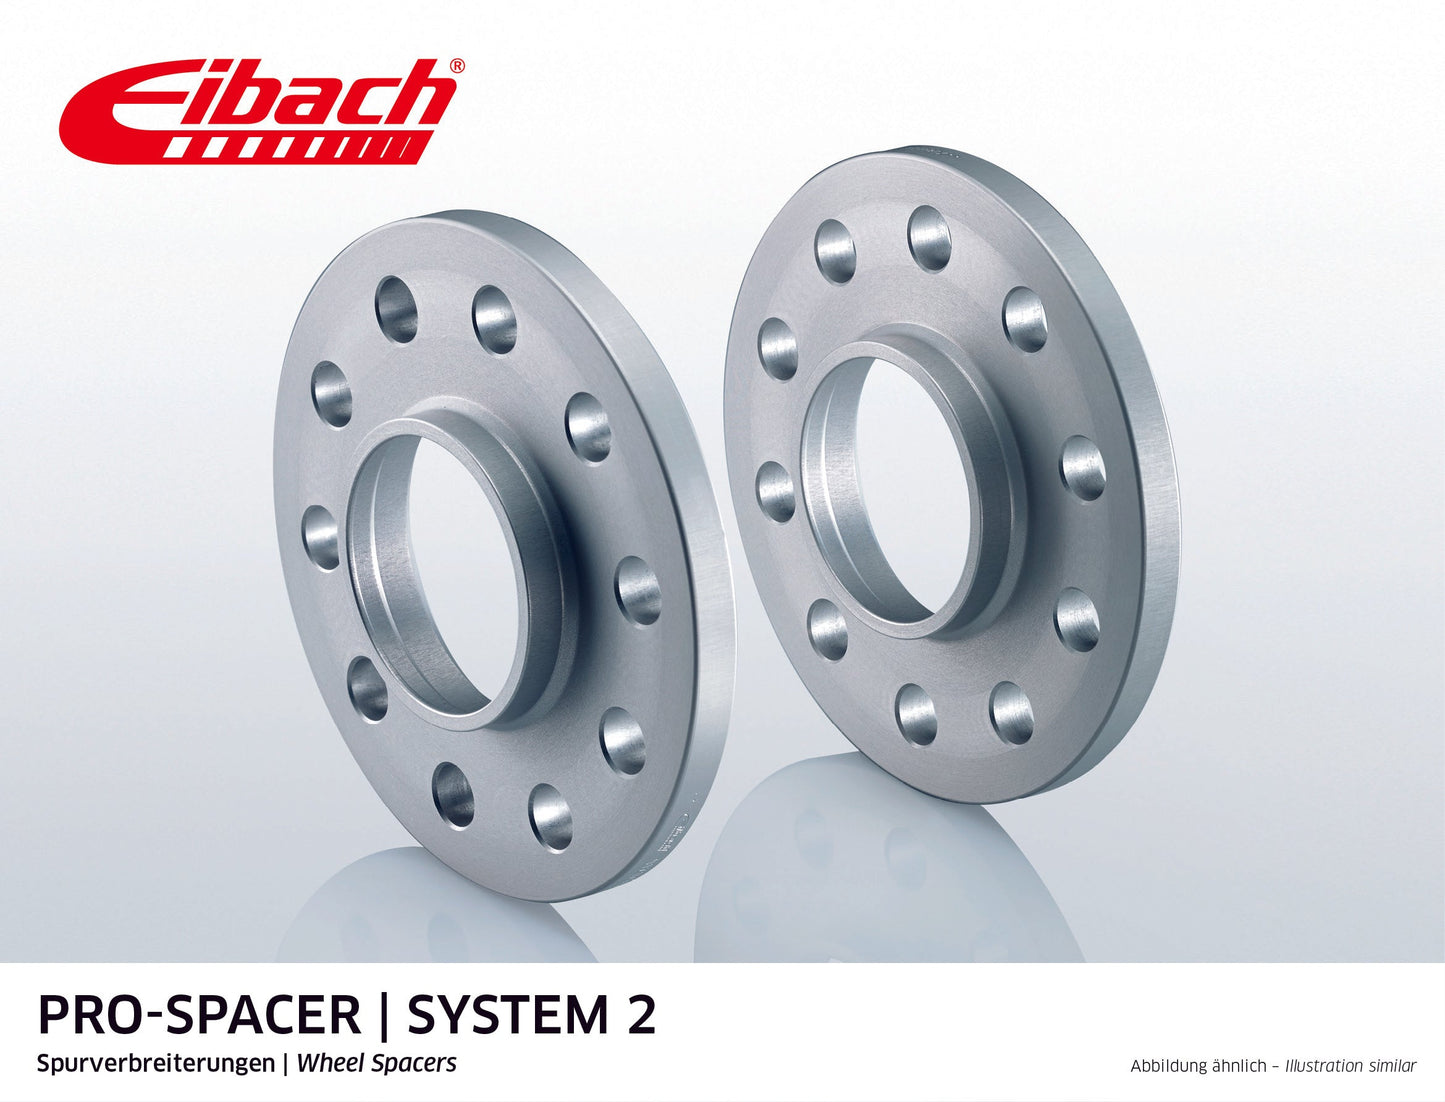 Eibach Pro-Spacer Kit (Pair Of Spacers) 20mm Per Spacer (System 2) S90-2-20-003 (Silver) at £127.67